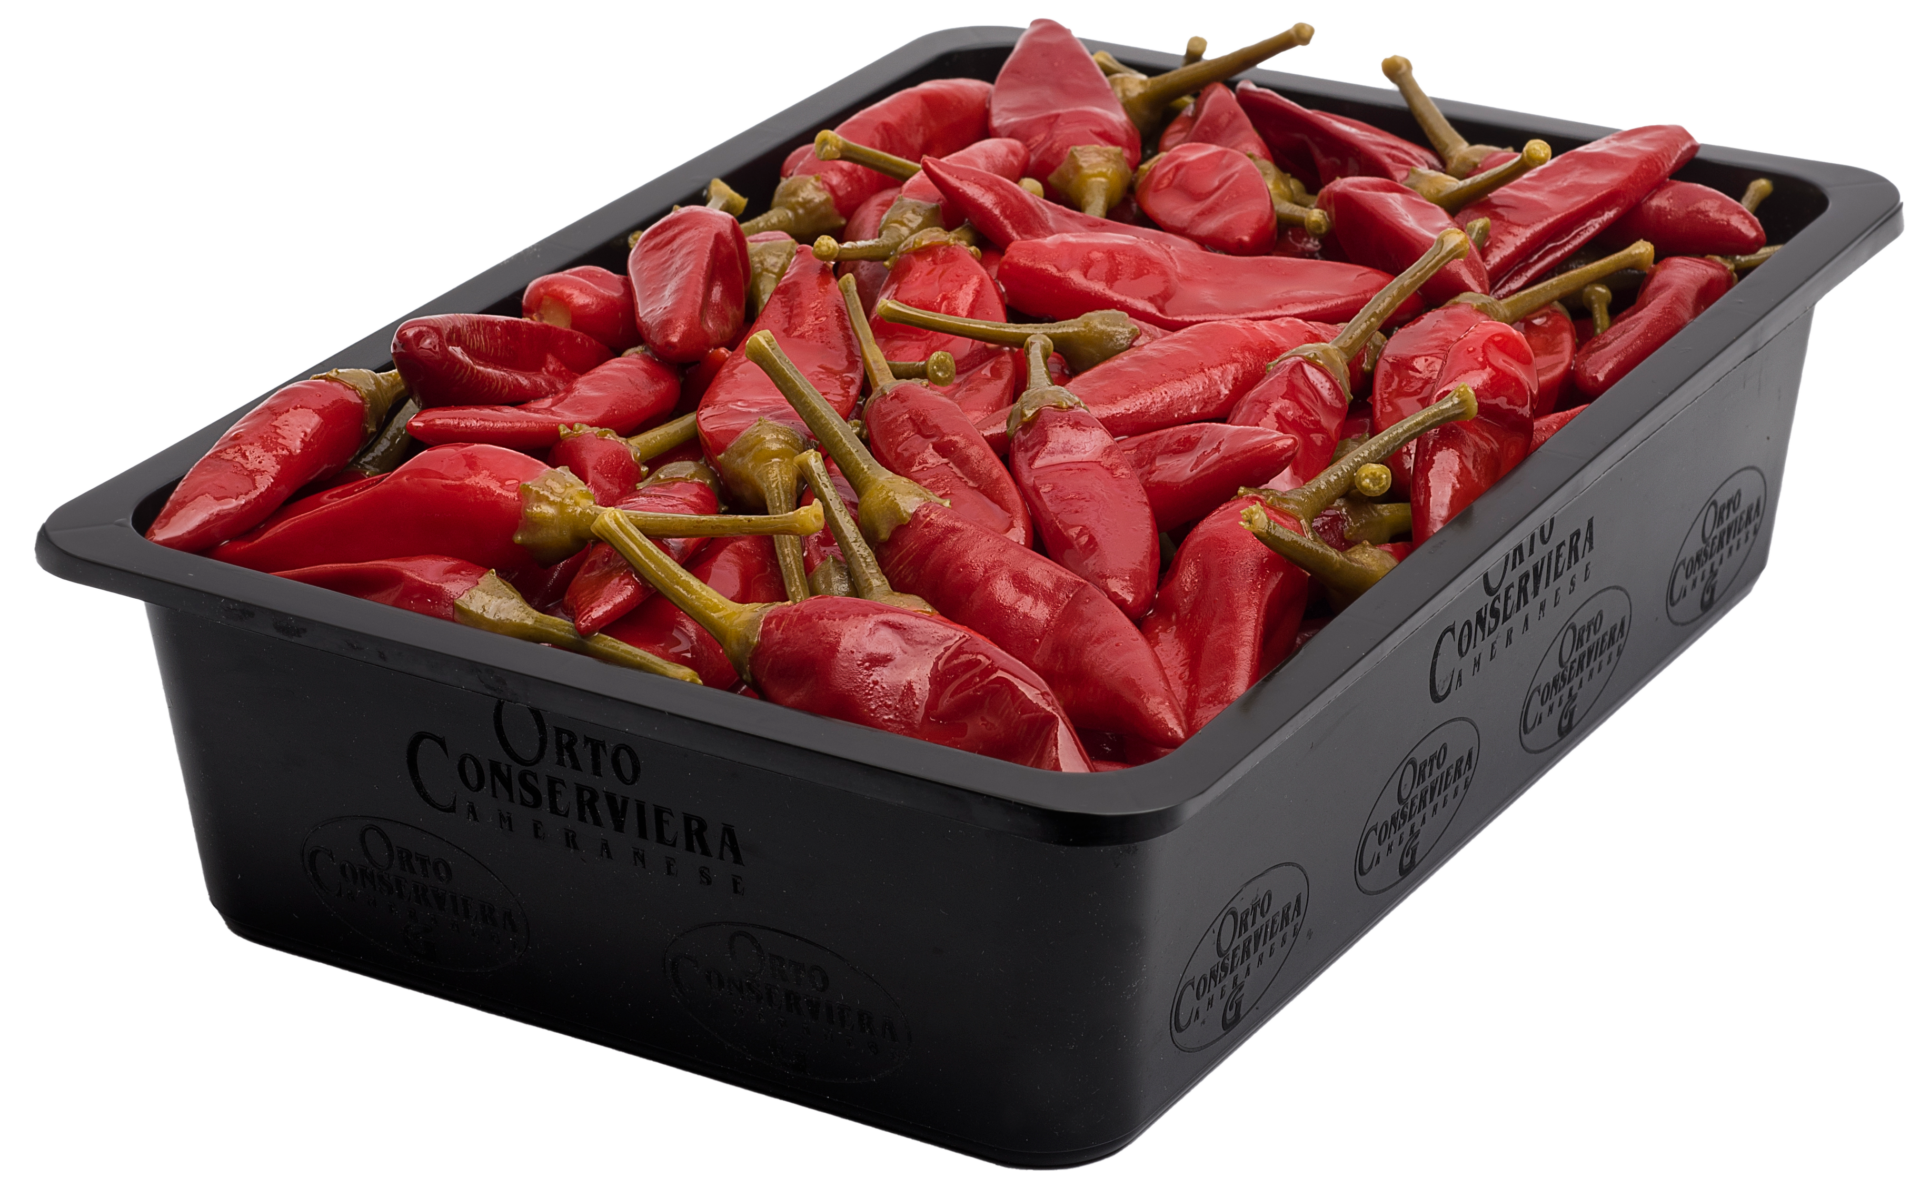 Whole Calabrian Chili Peppers